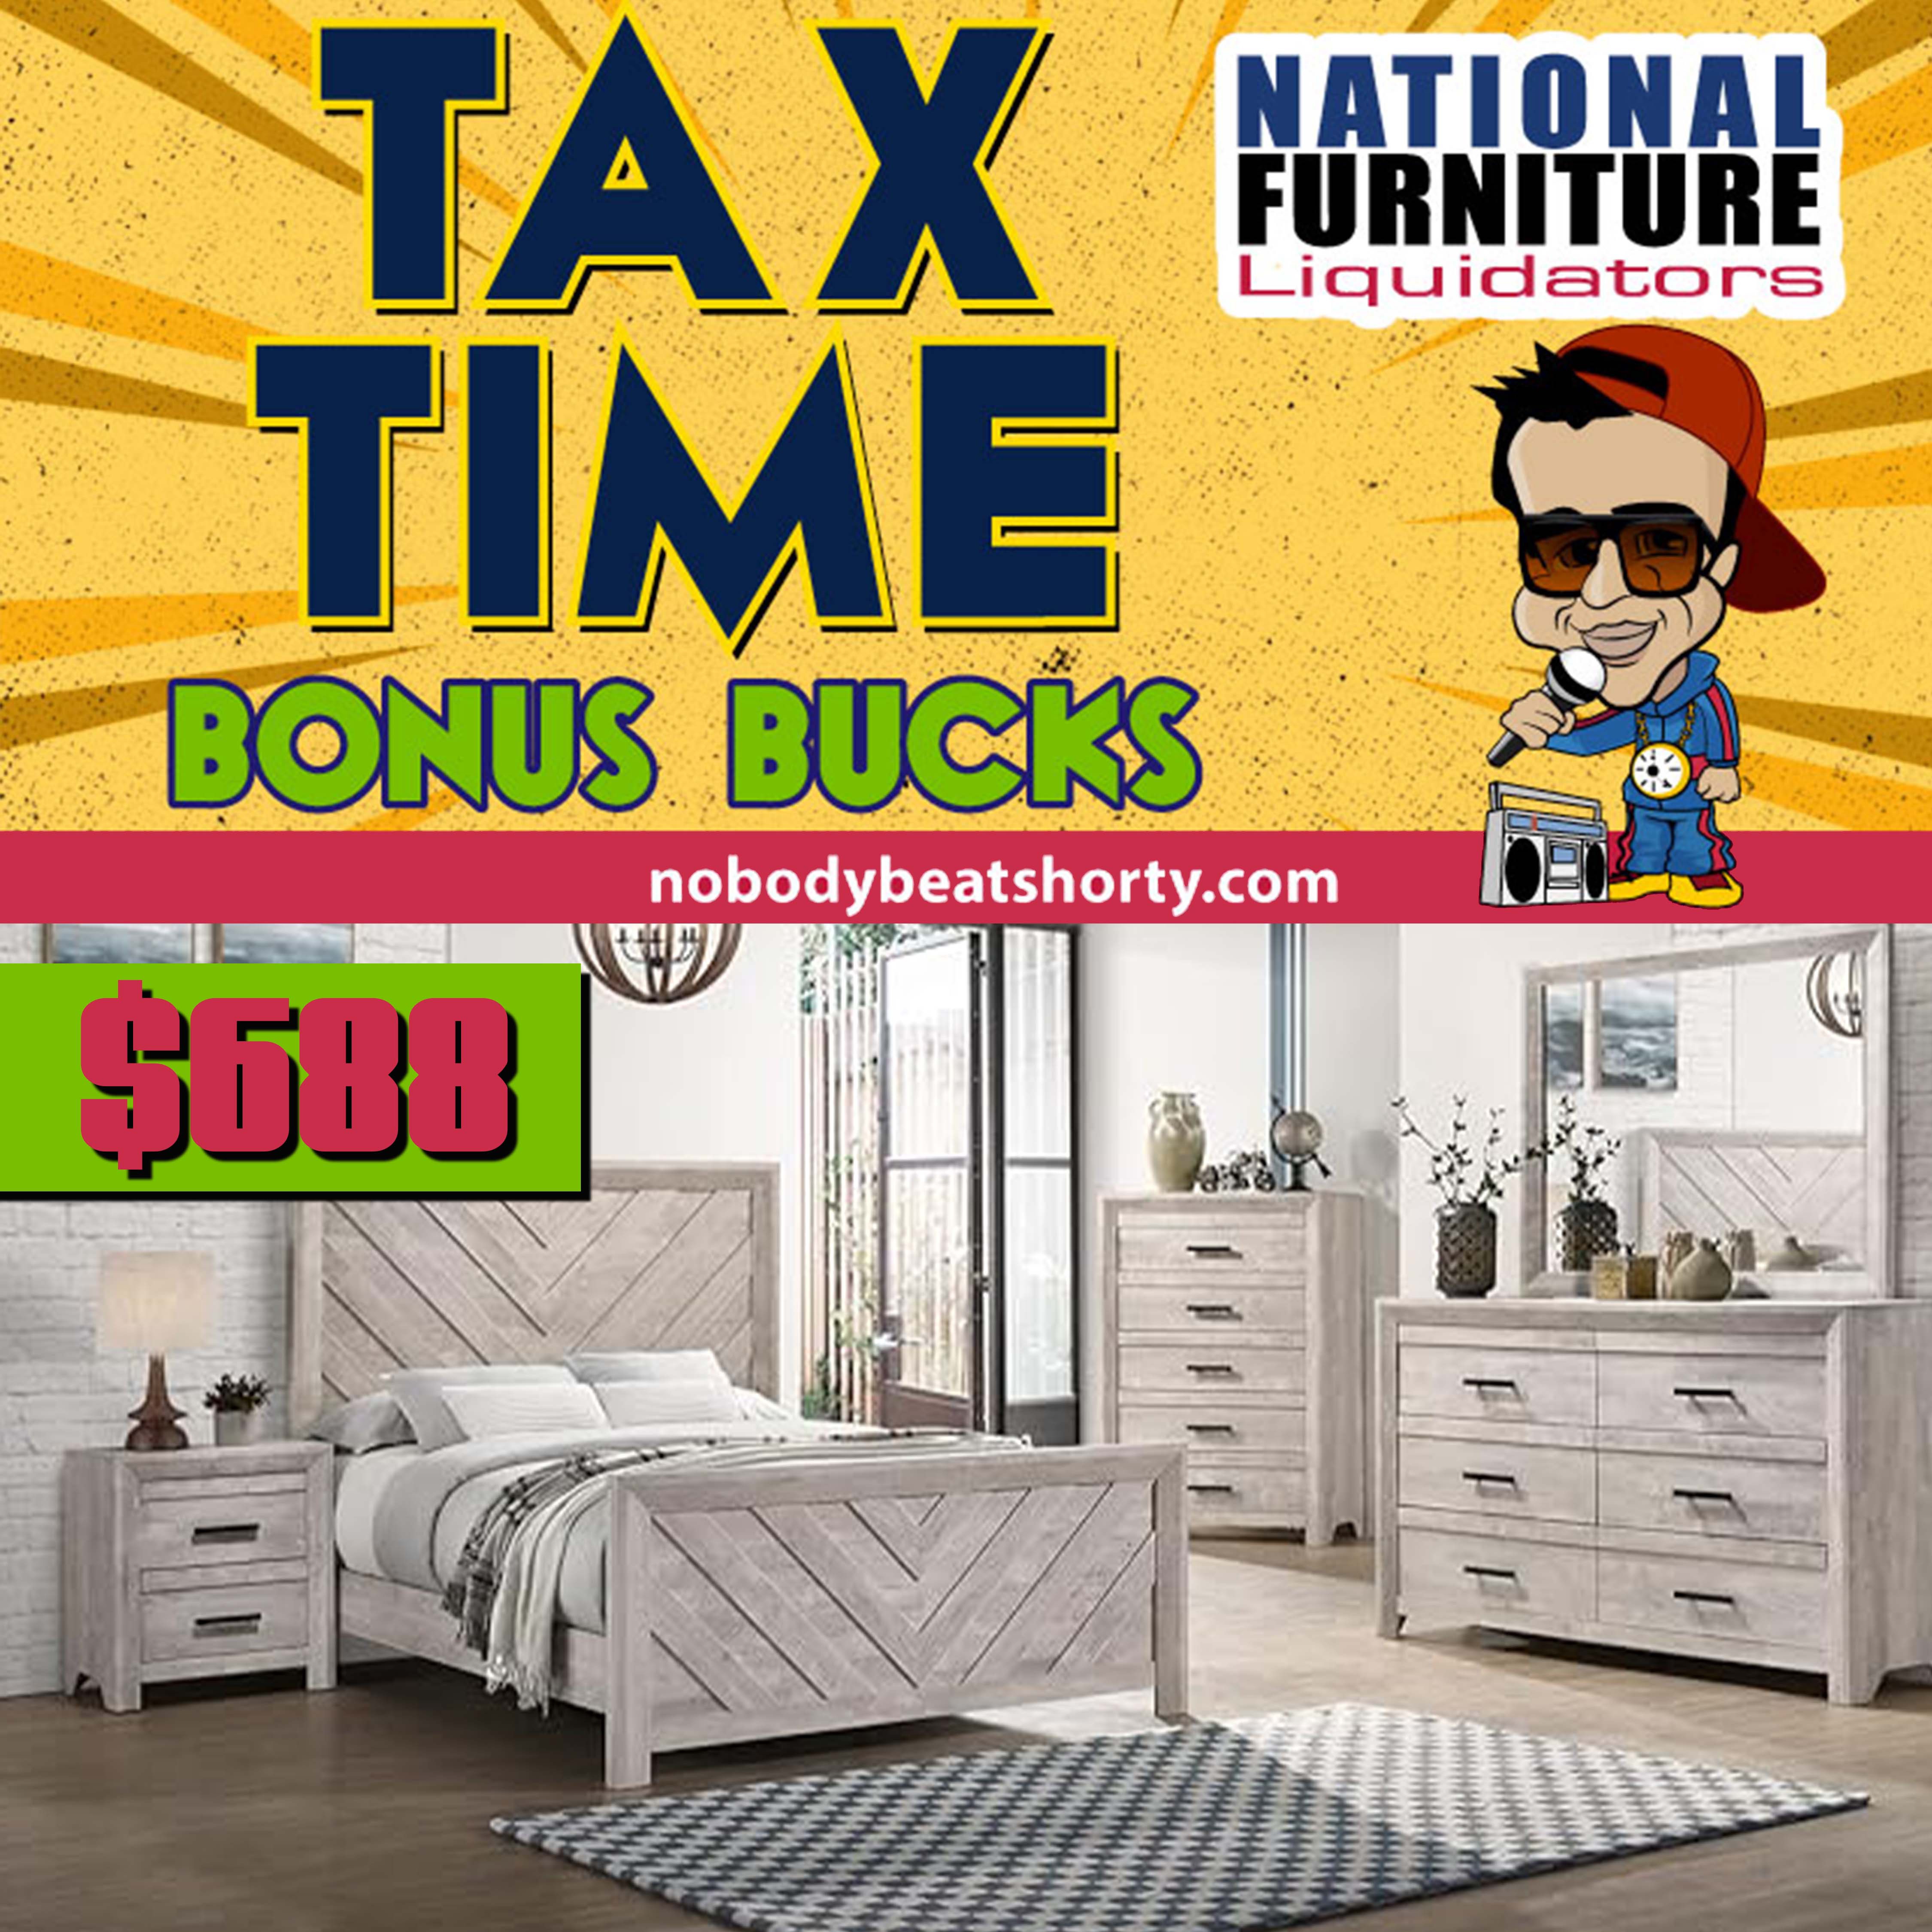 Maximize Your Tax Refund with Unbeatable Furniture Deals - National Furniture Liquidators